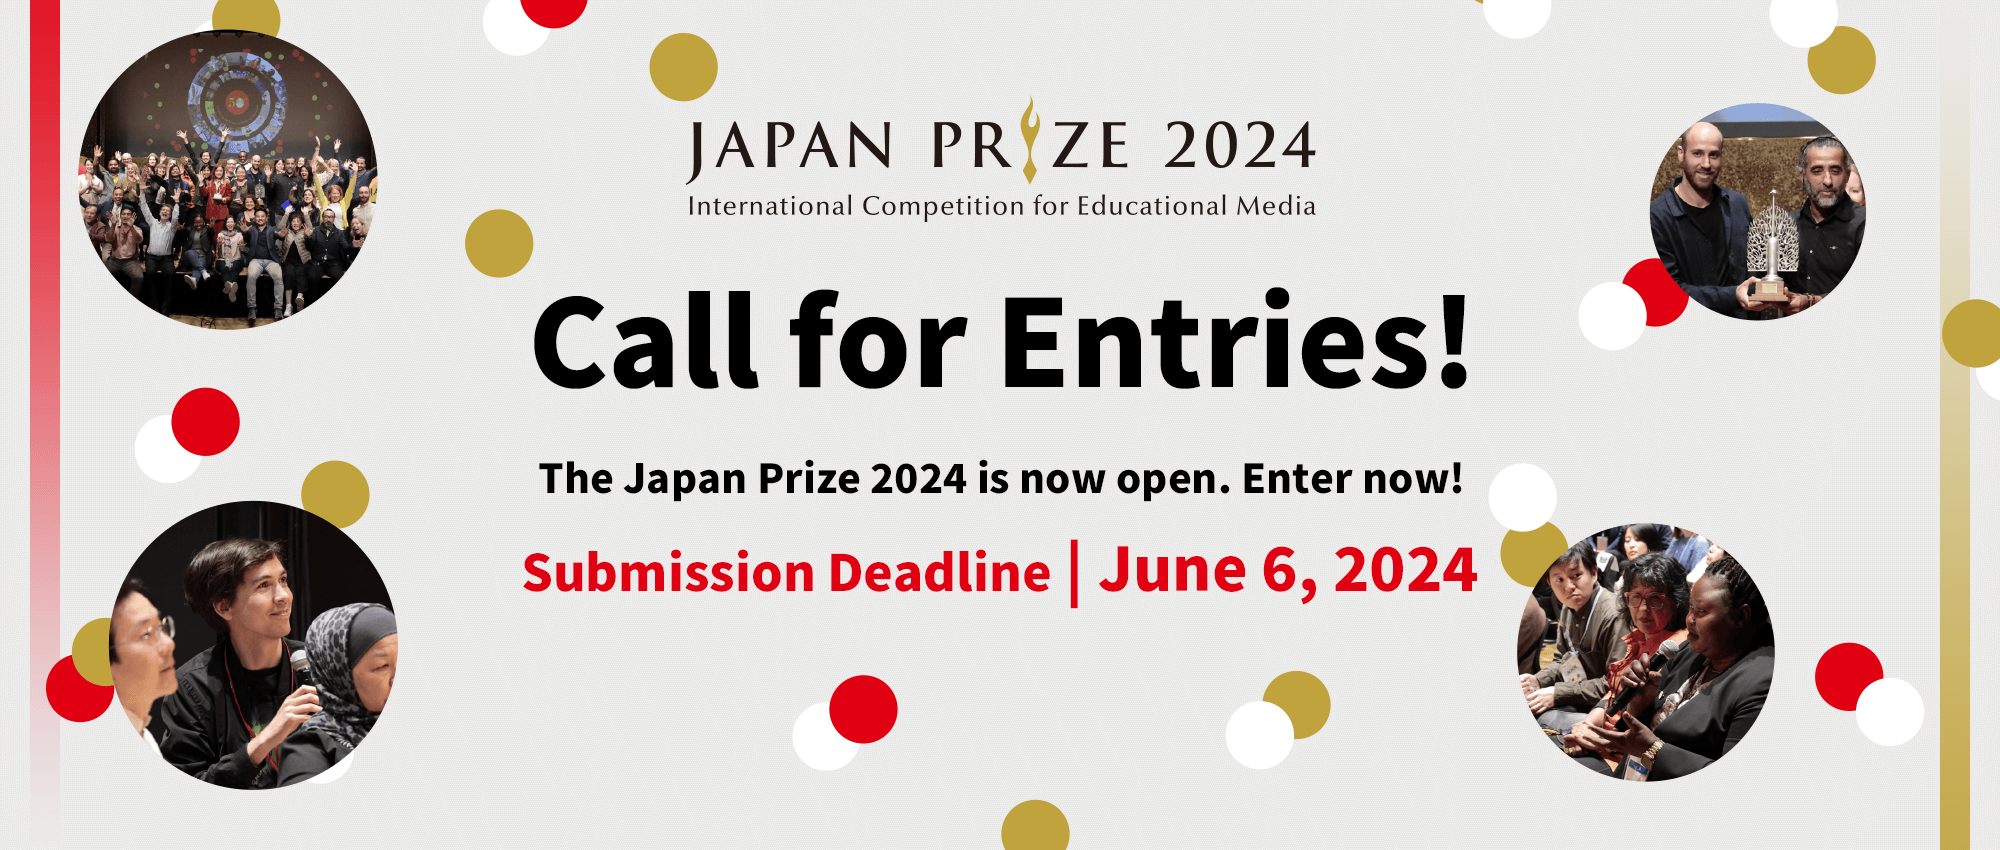 Call for entries! Submission Deadline: June 6, 2024